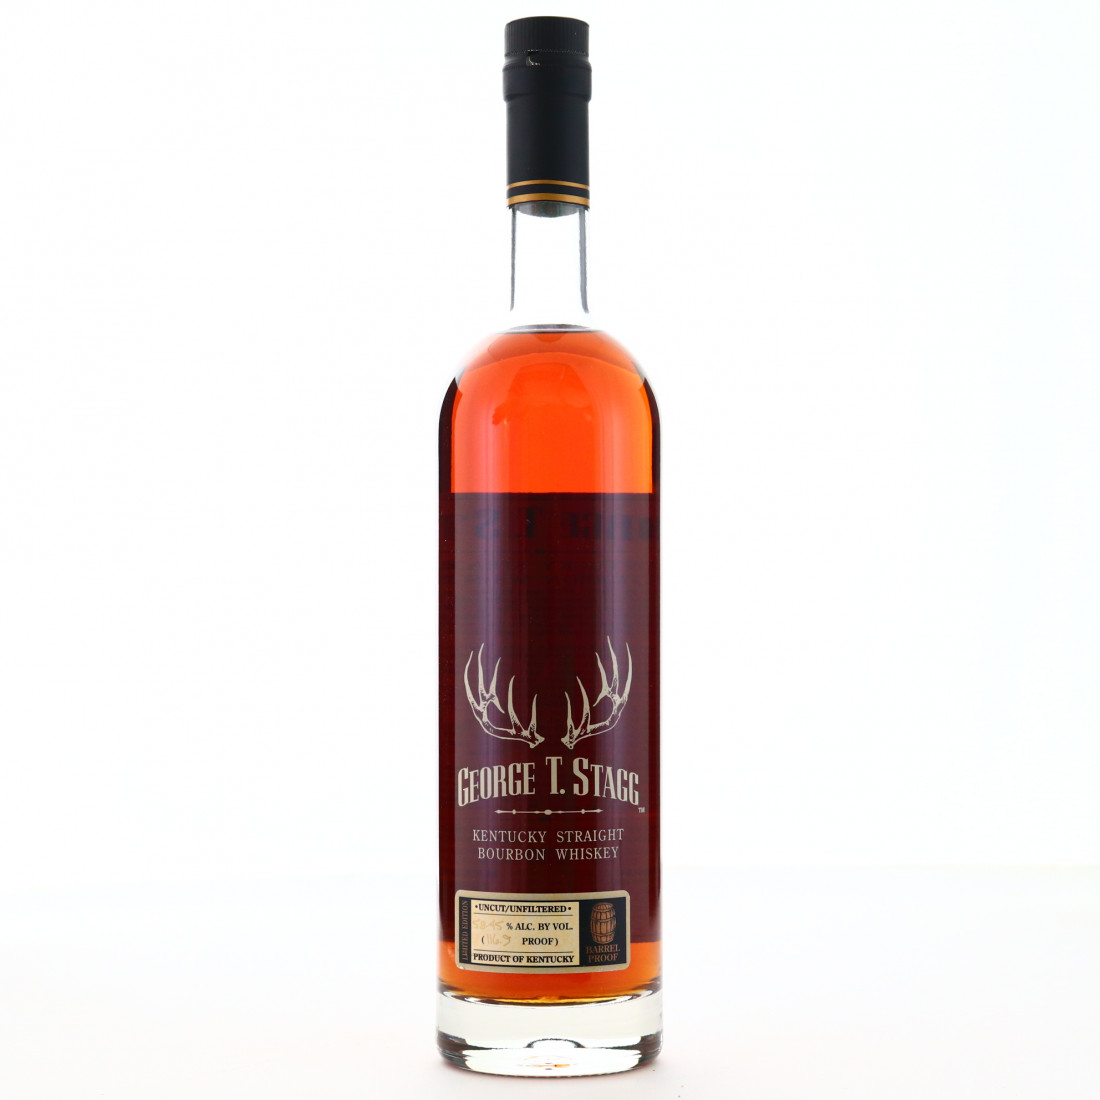 George T Stagg 58.45%